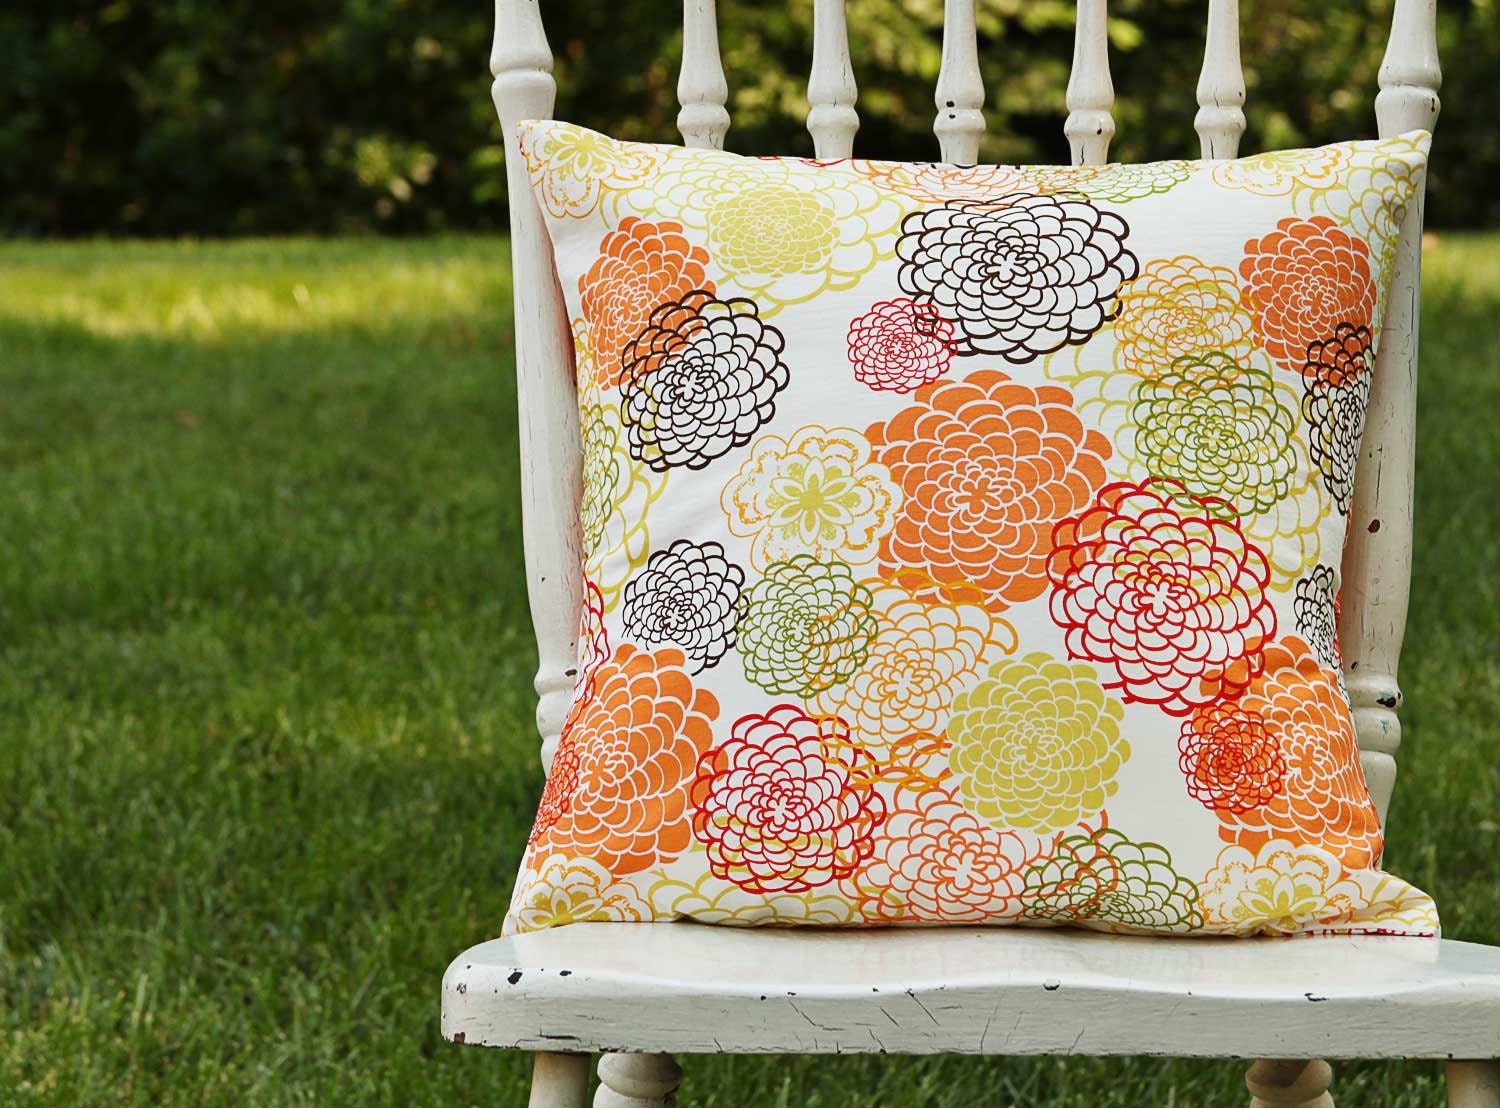 Throw Pillow Cover Orange Blossom Orange Brown Yellow Floral Explosion 16 x 16 Handmade by Willow Whimsy